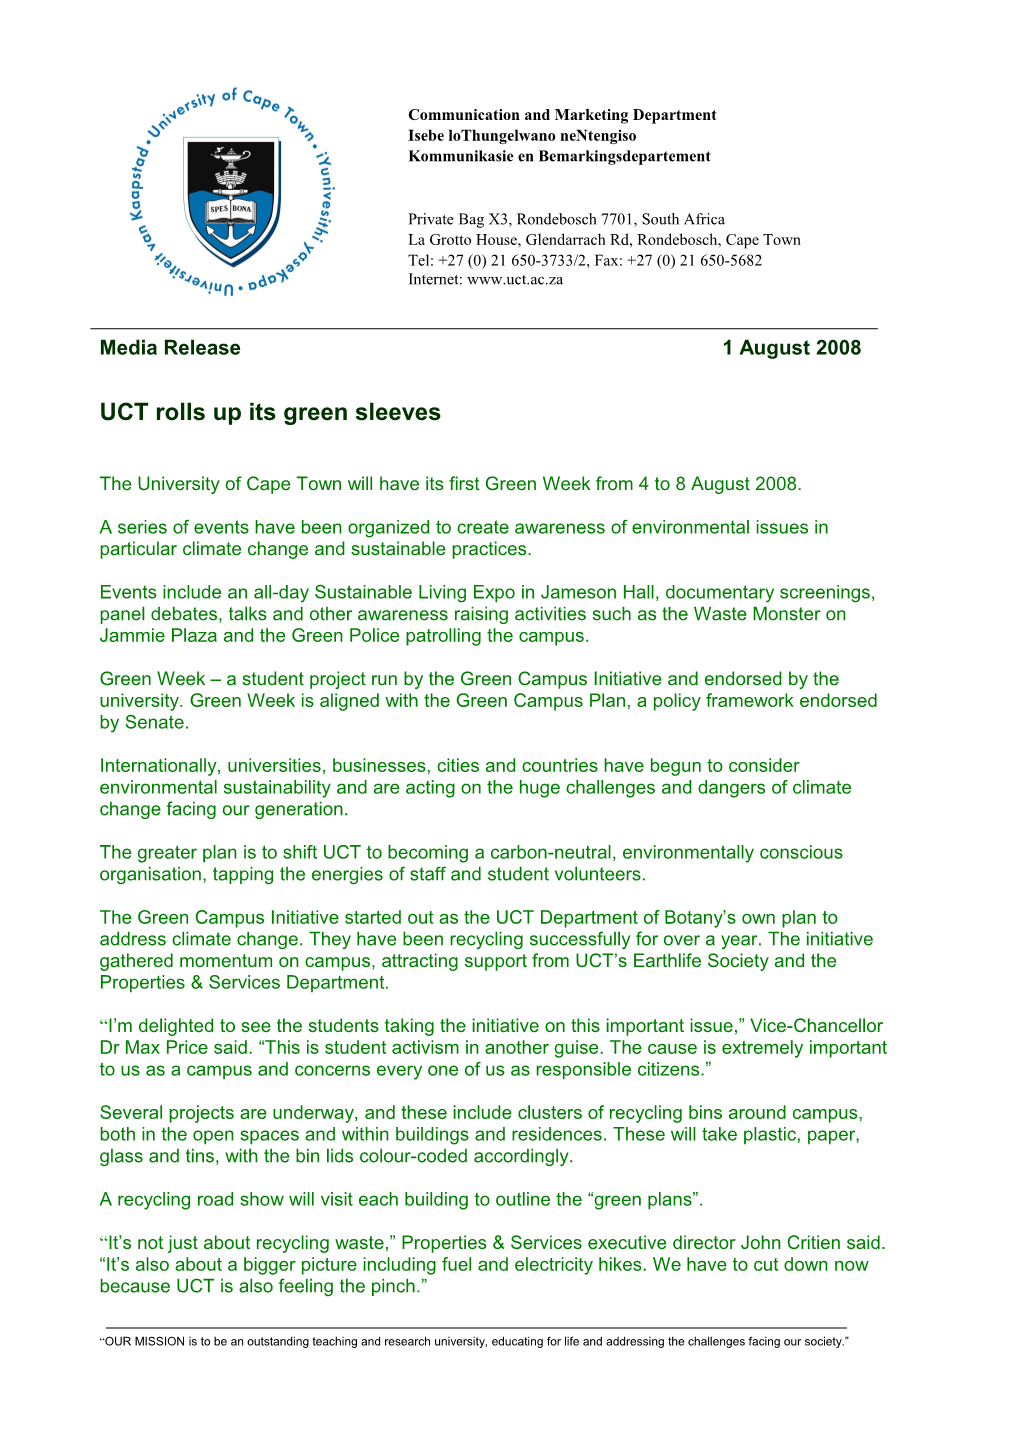 UCT Rolls up Its Green Sleeves